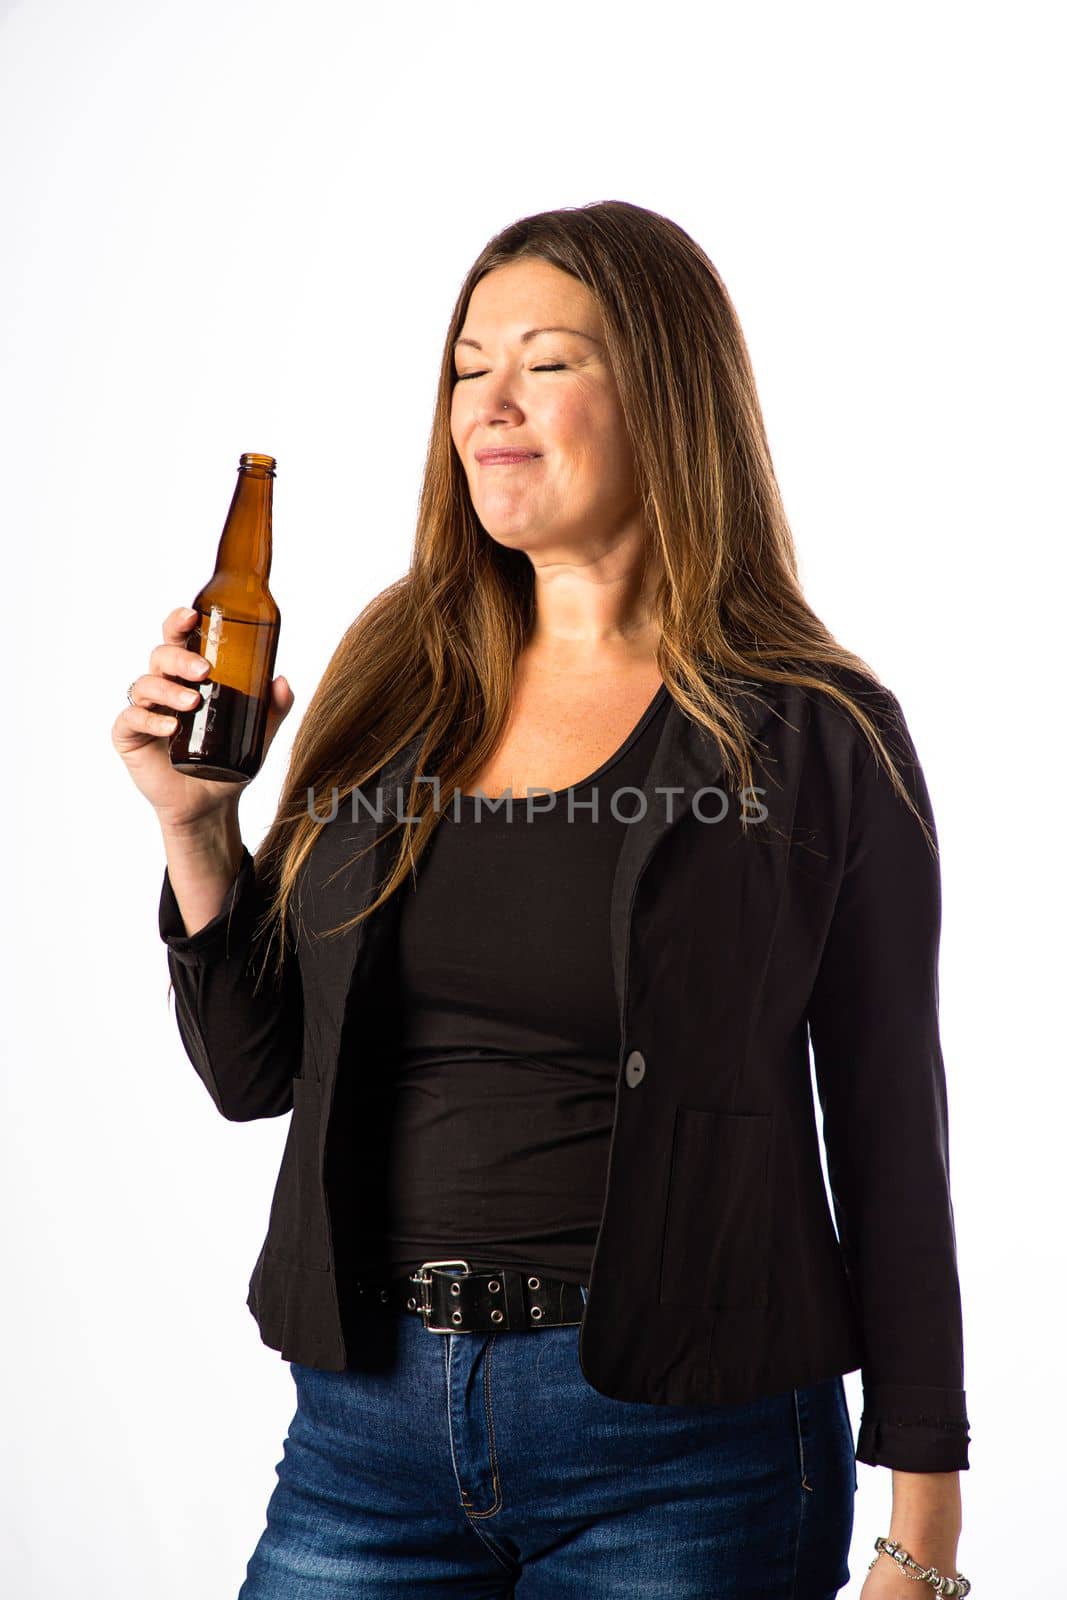 Isolated portrait of a forty year old woman in a sport coat holding a brown beer bottle, enjoying a drink
